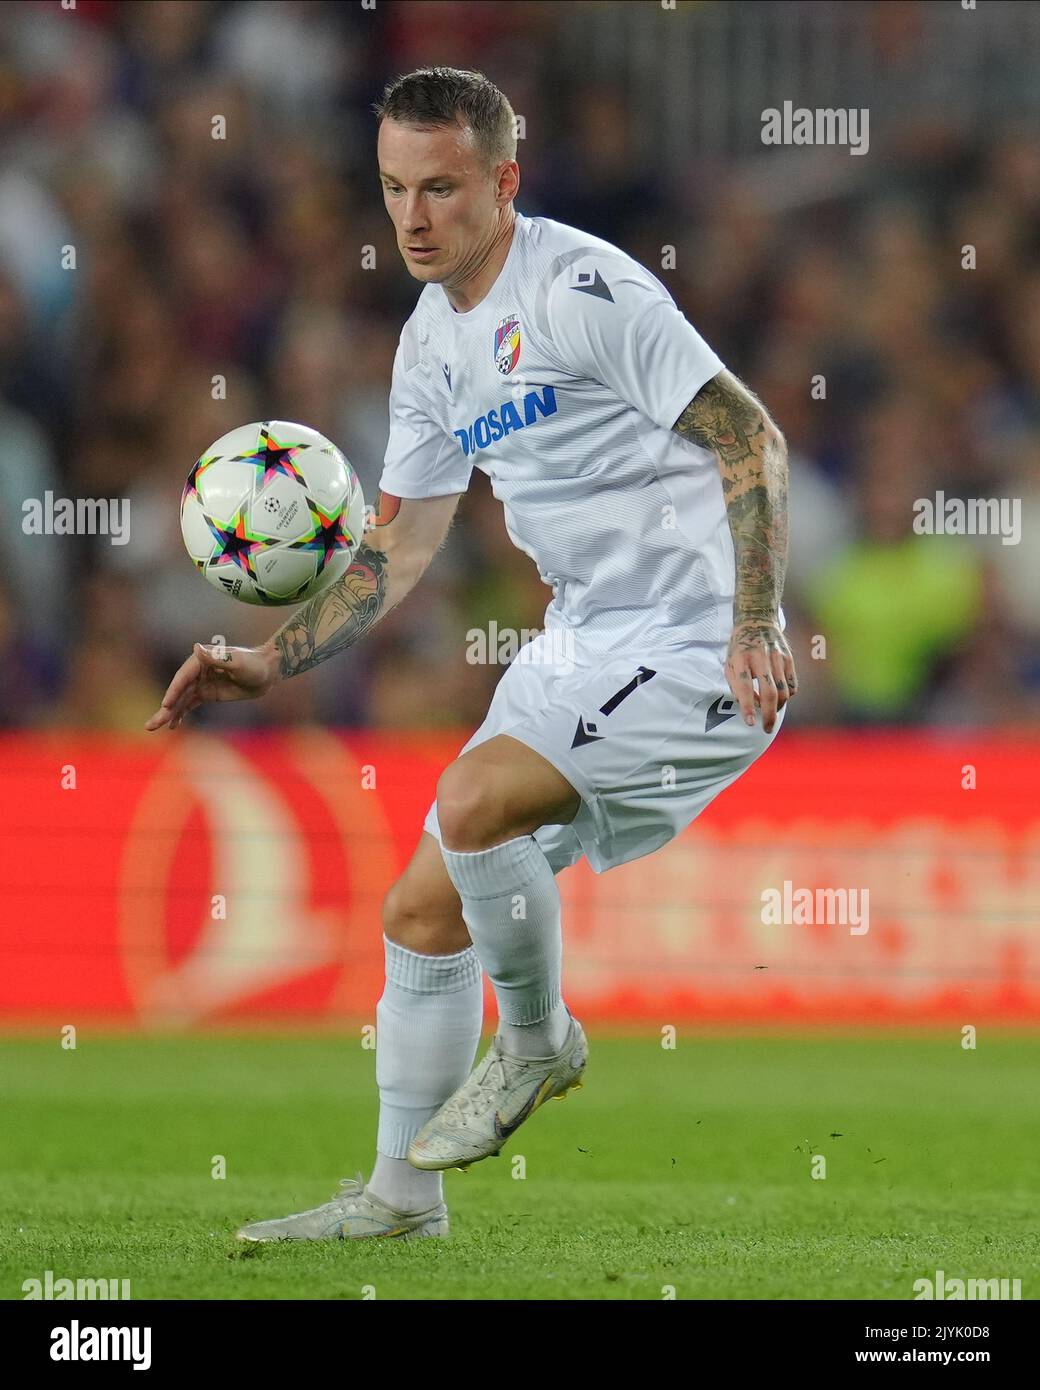 Barcelona, Spain. 07th Sep, 2022. Jan Sykora of Viktoria Plzen during the UEFA Champions League match between FC Barcelona and Viktoria Plzen, Group C, played at Spotify Camp Nou Stadum on Sep 7, 2022 in Barcelona, Spain. (Photo by Colas Buera/PRESSIN) Credit: PRESSINPHOTO SPORTS AGENCY/Alamy Live News Stock Photo